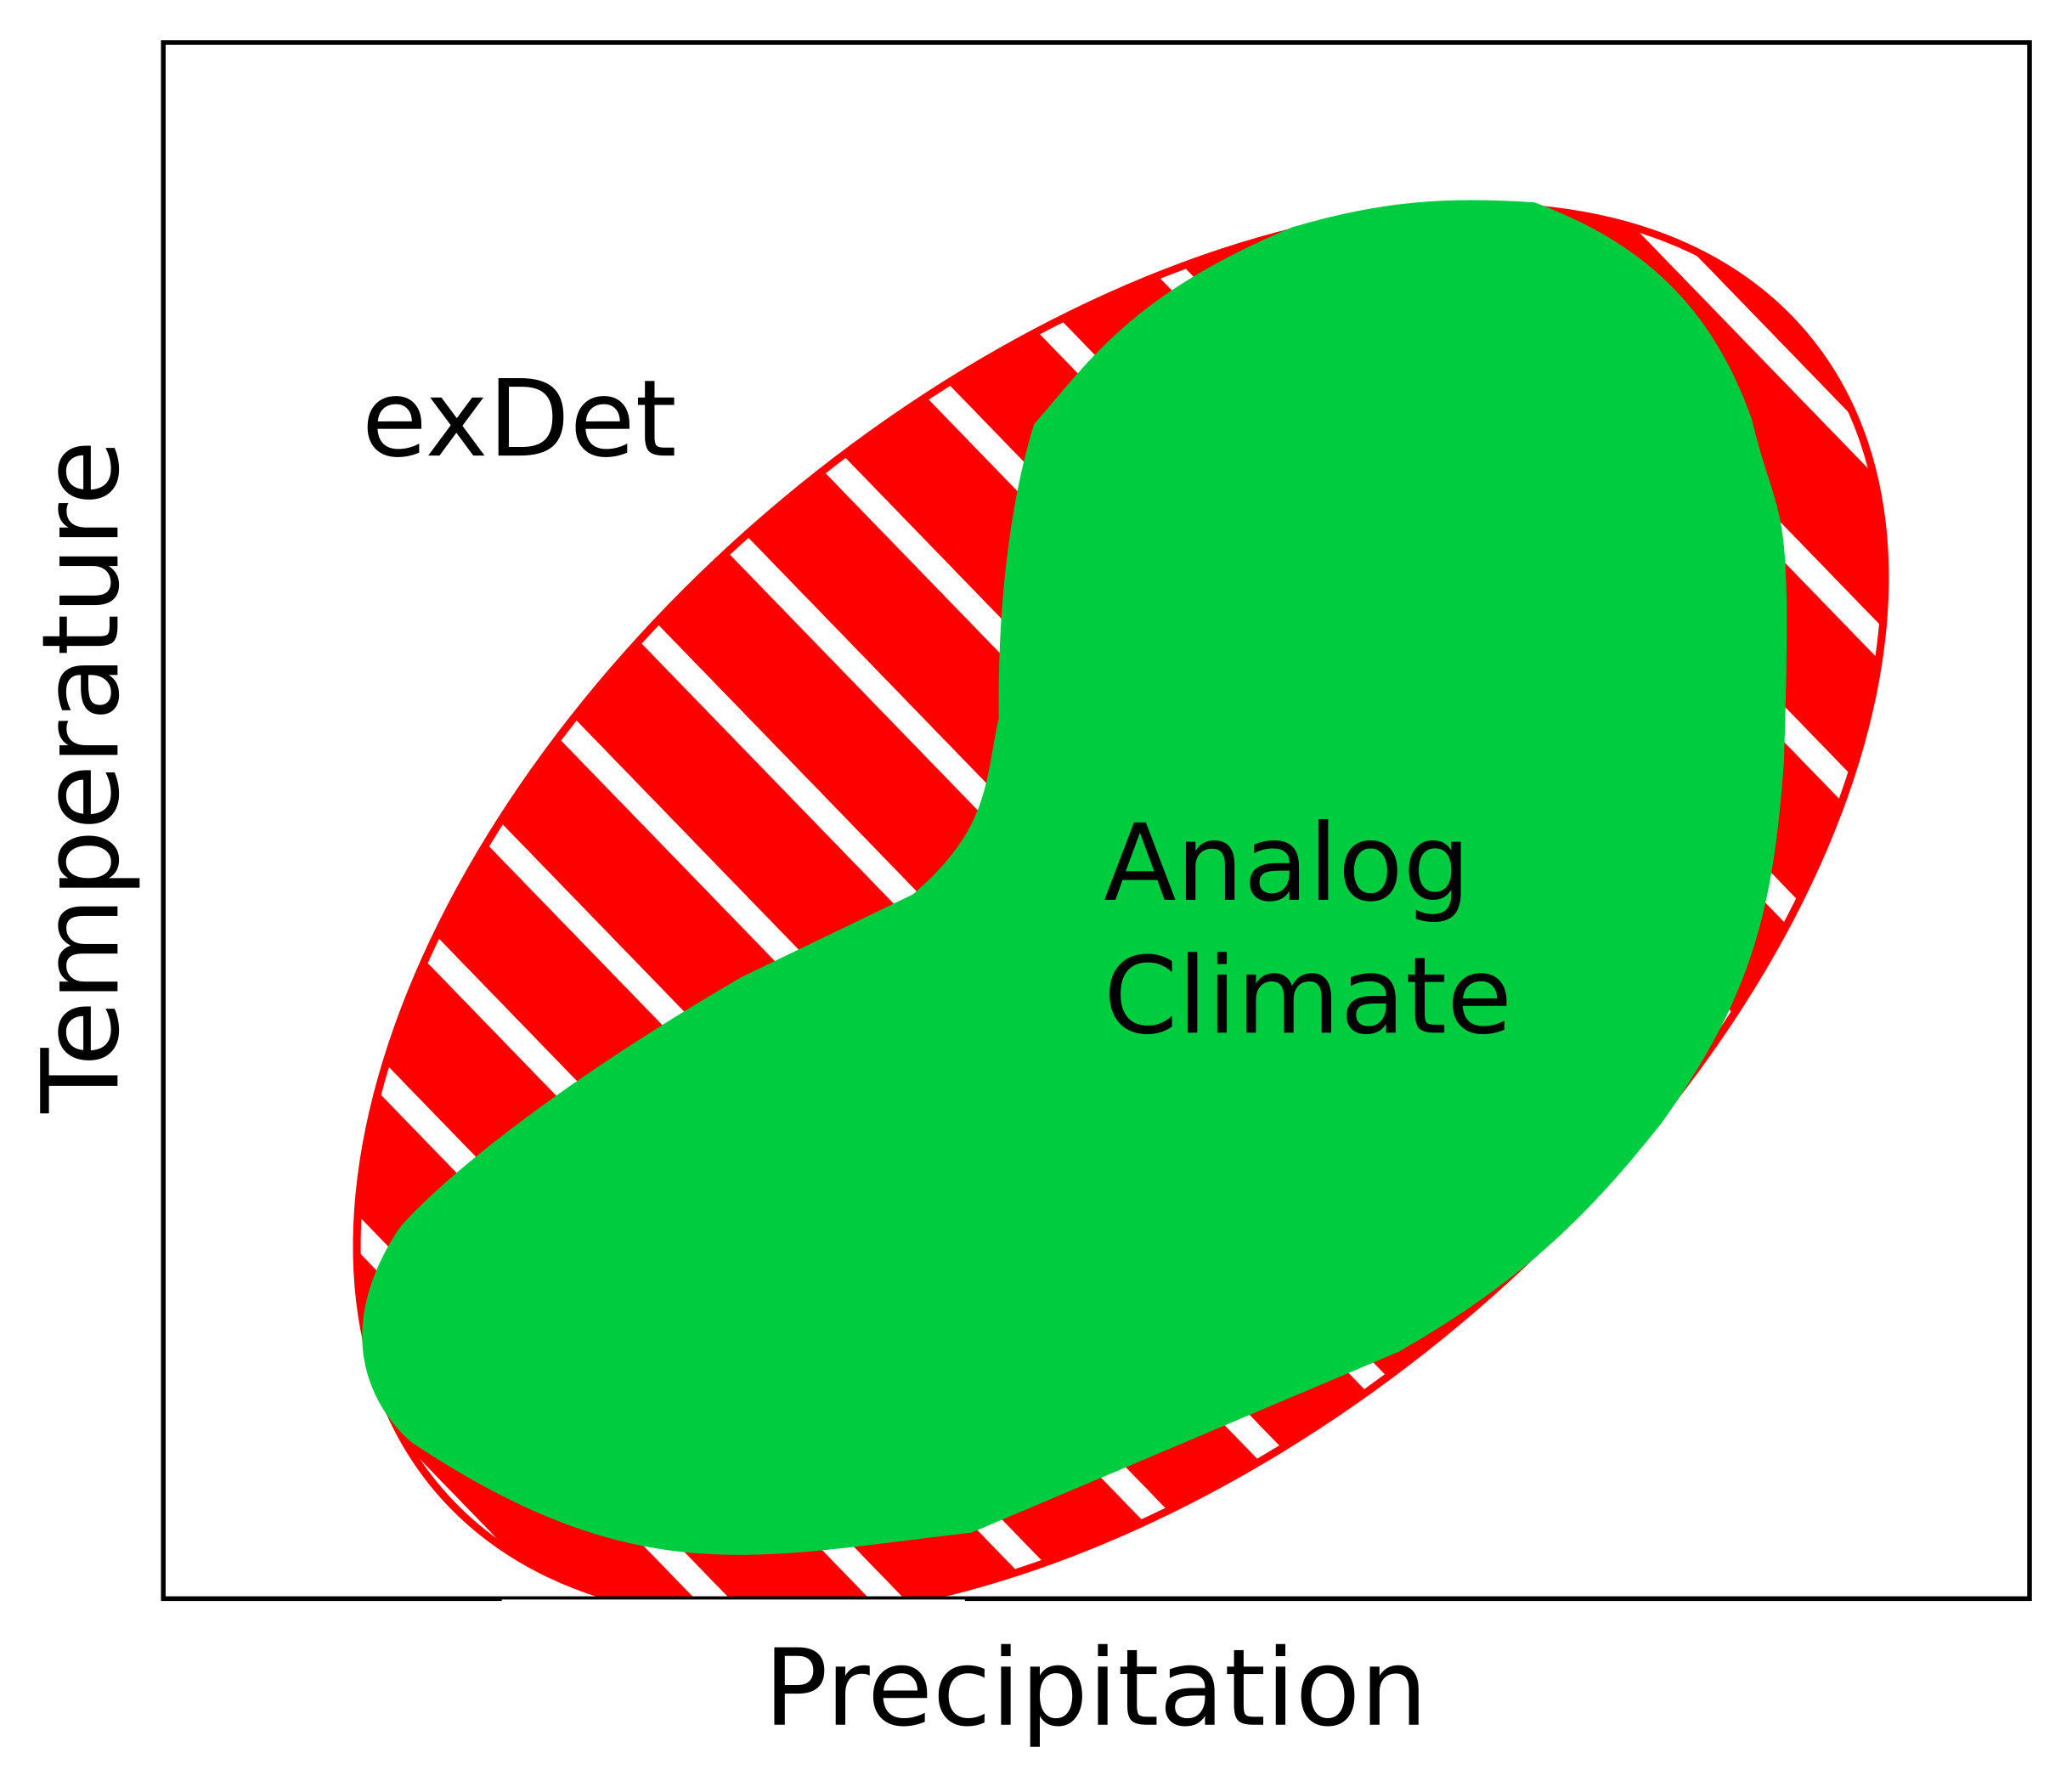 Visualization of exDet analysis. The green area indicates the reference climate conditions, and the red ellipse shows the climate space exDet will identify as ‘analog’.